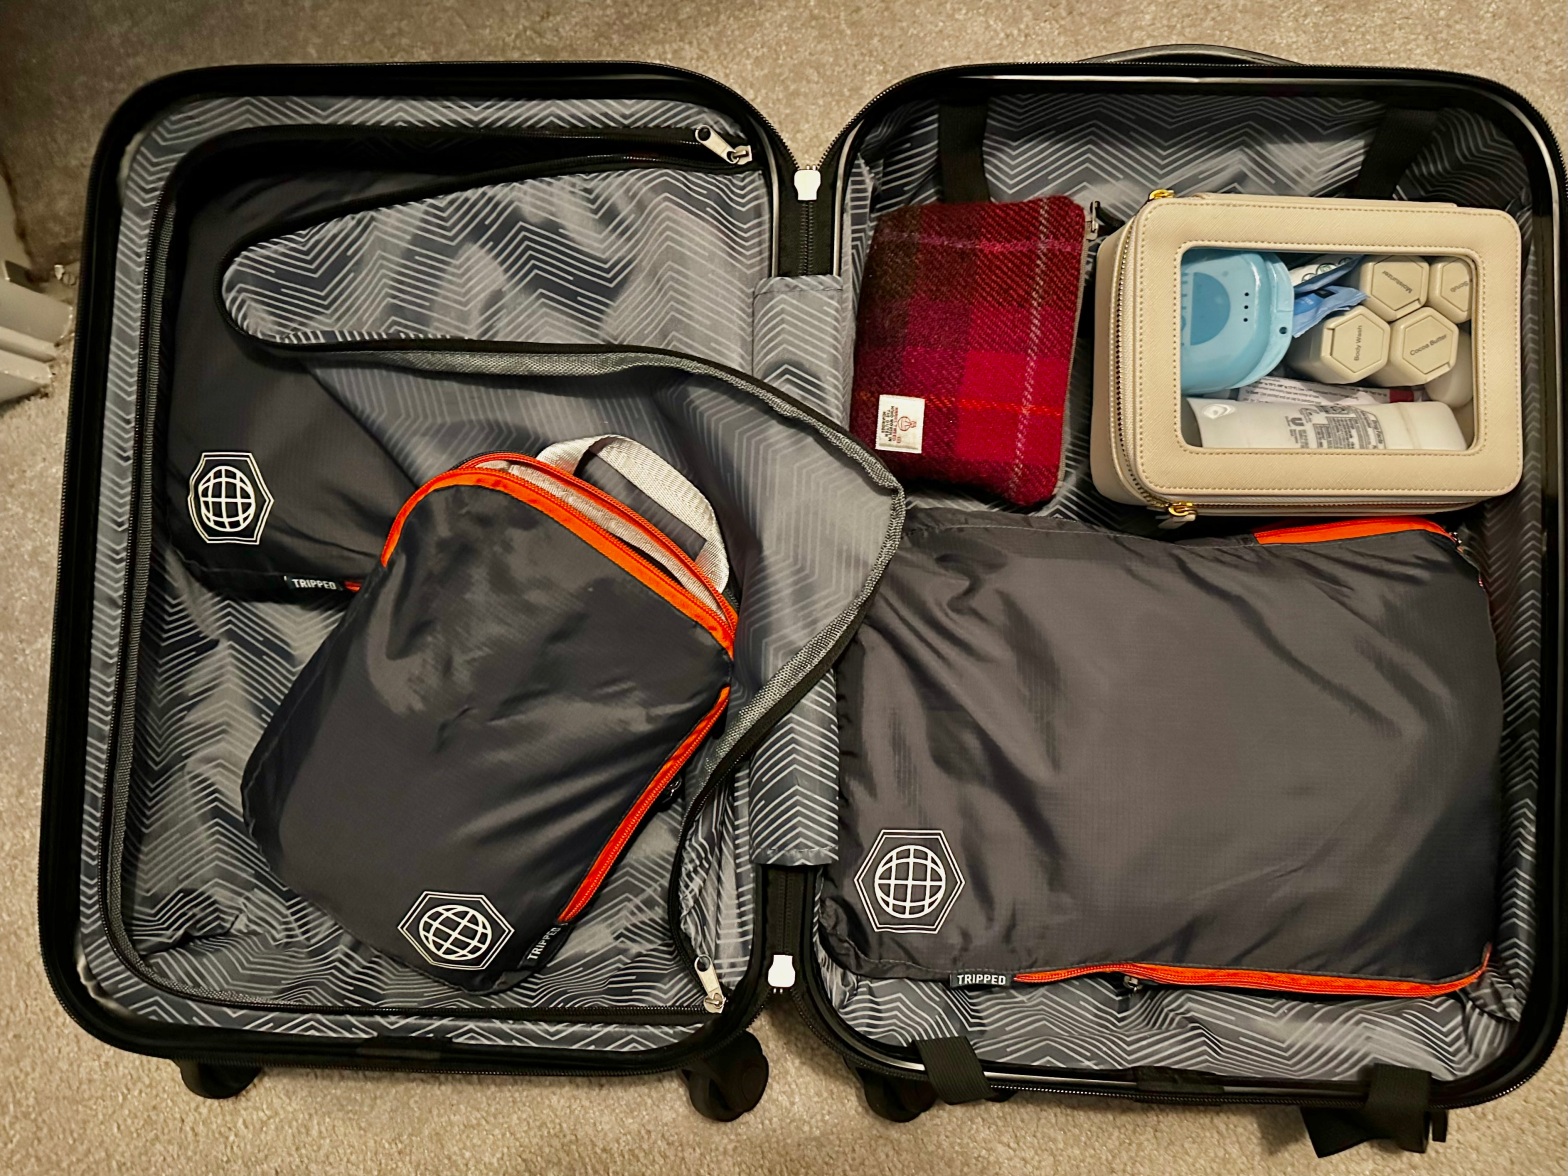 Top Travel Gear: Compression Packing Cubes